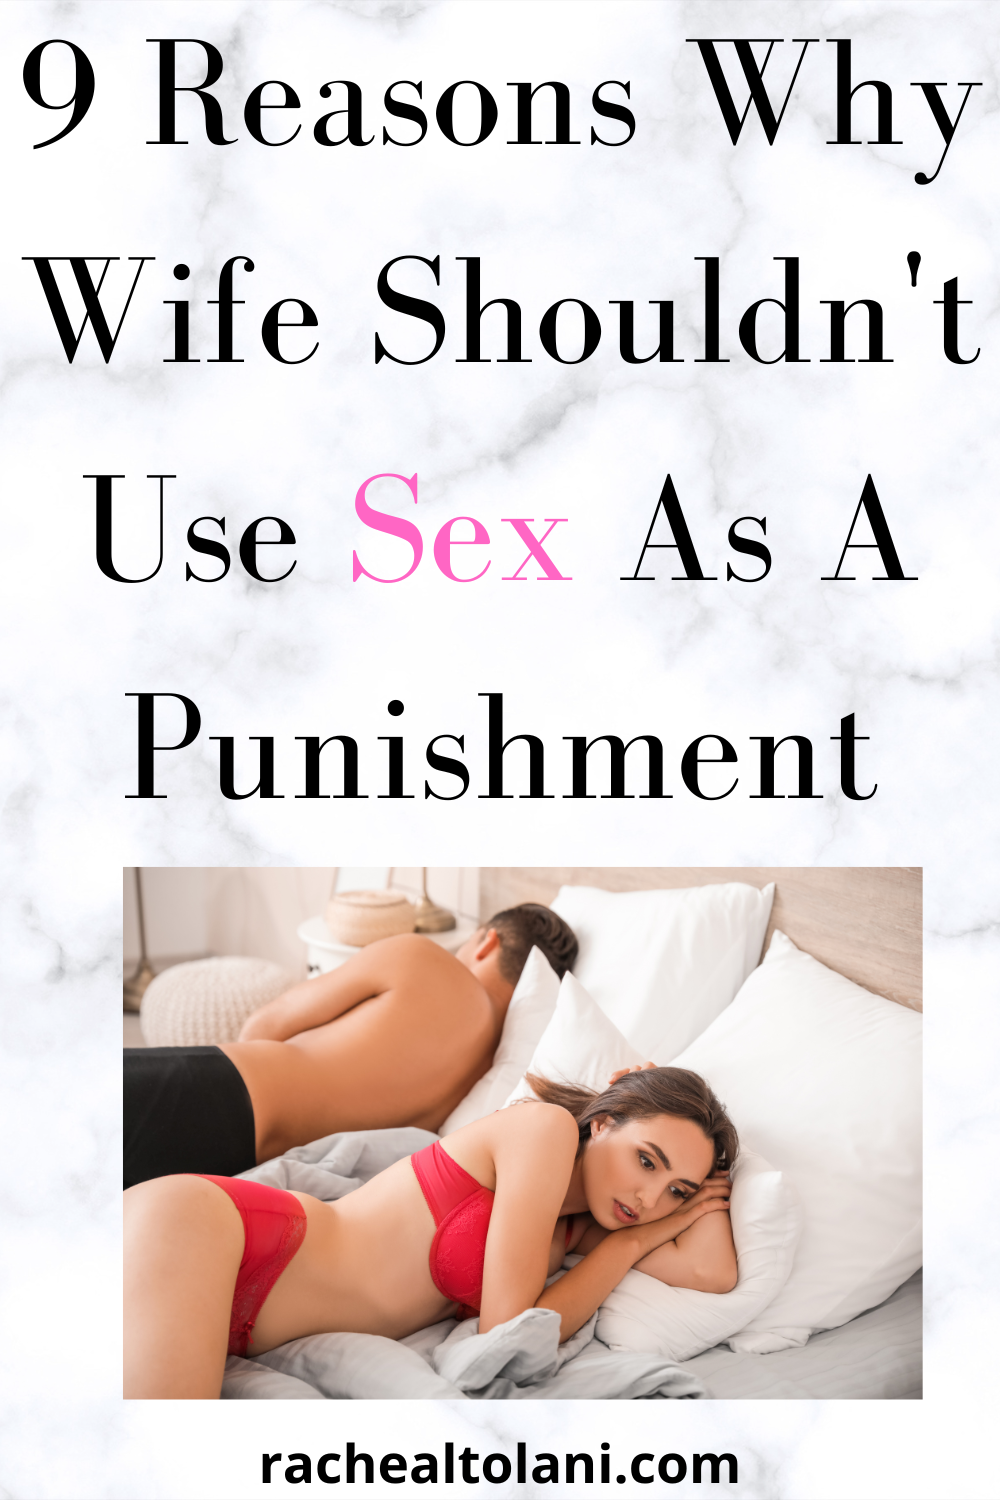 9 Reasons Why Wife Shouldnt Use Sex As A Punishment - photo